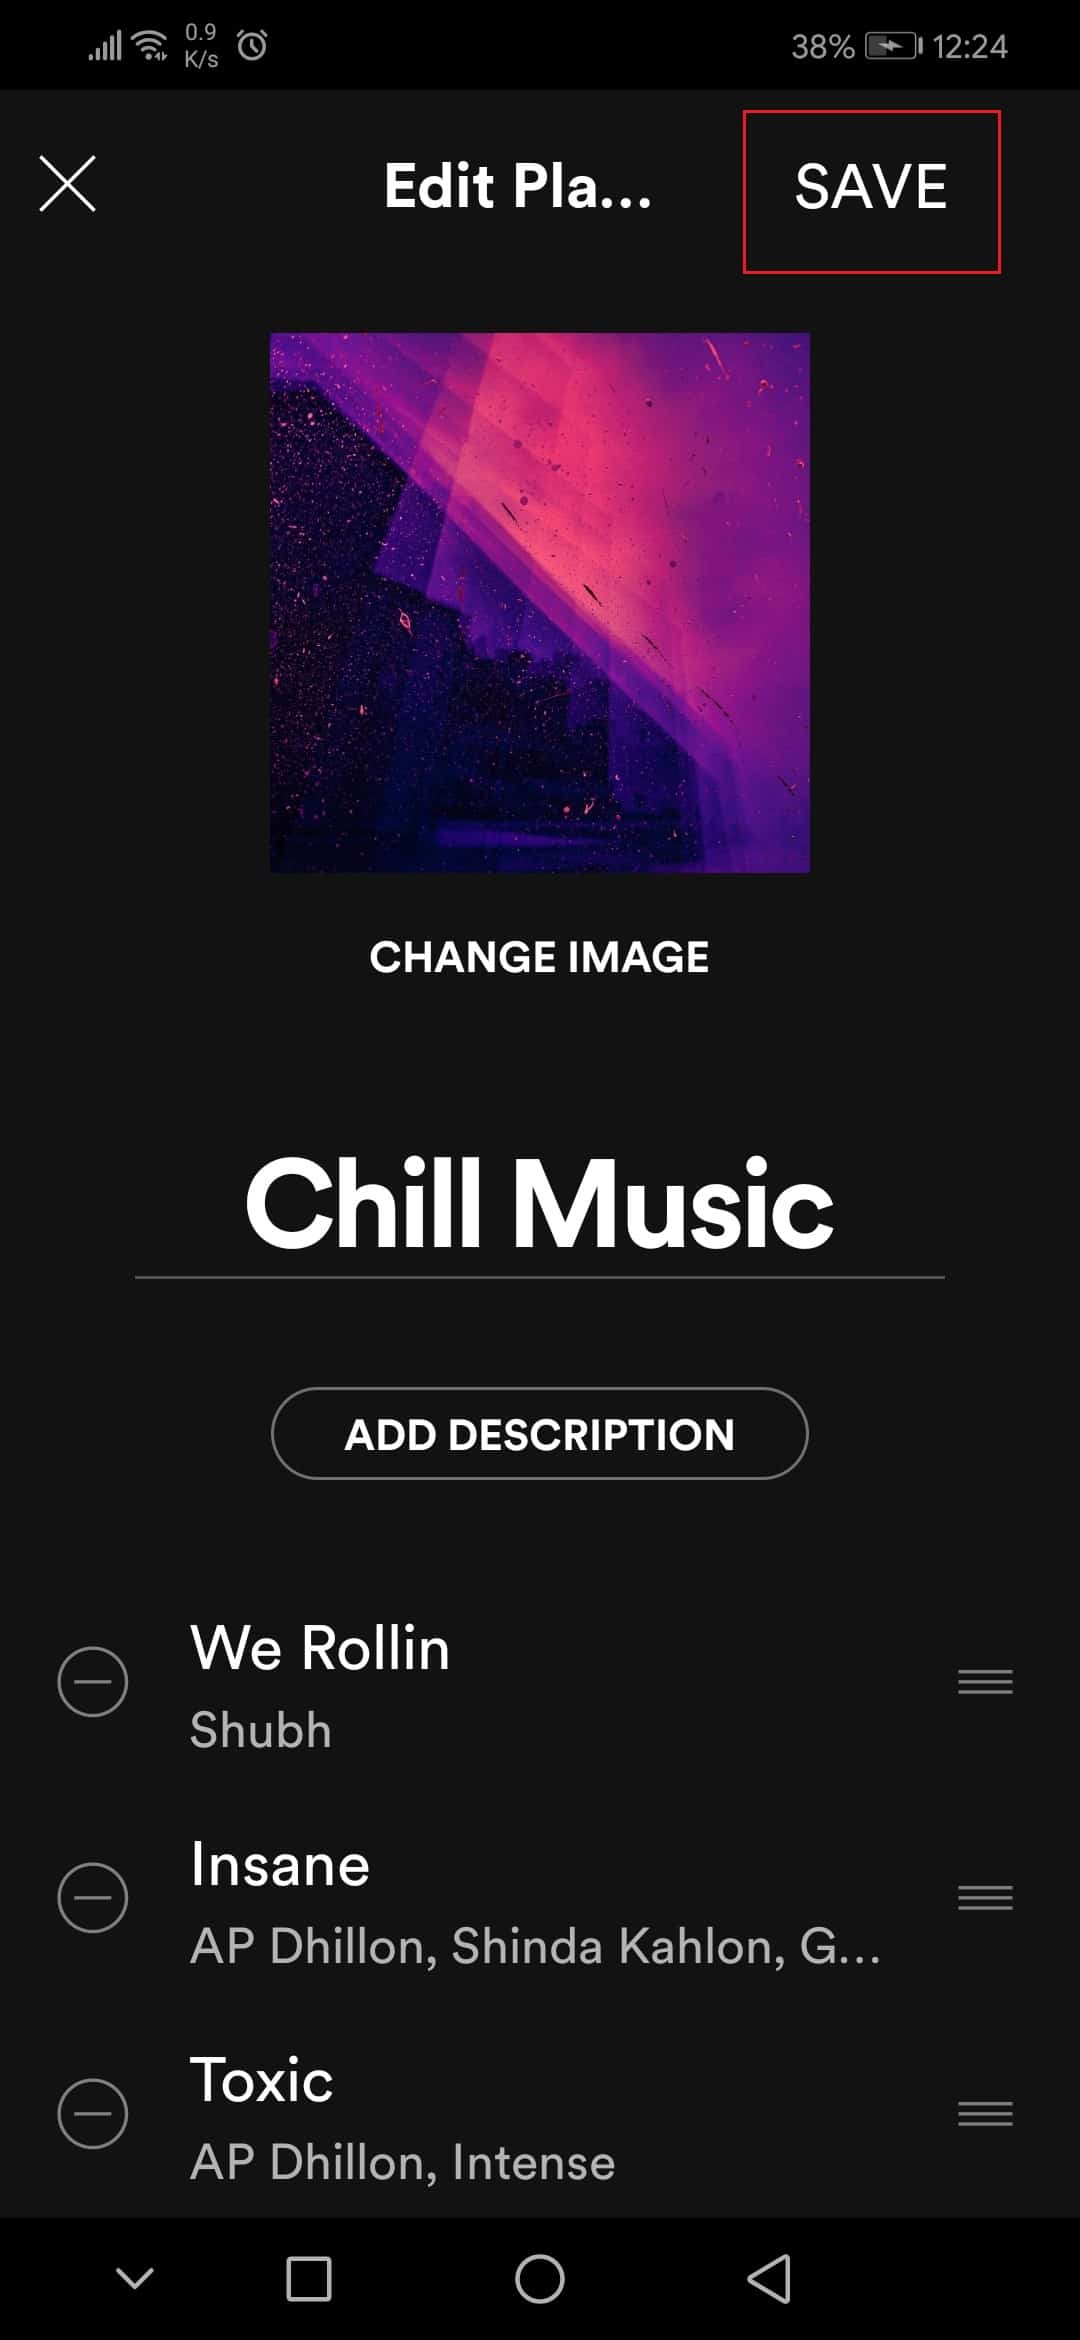 tap on SAVE option to change image of Spotify playlist Honor Play Android